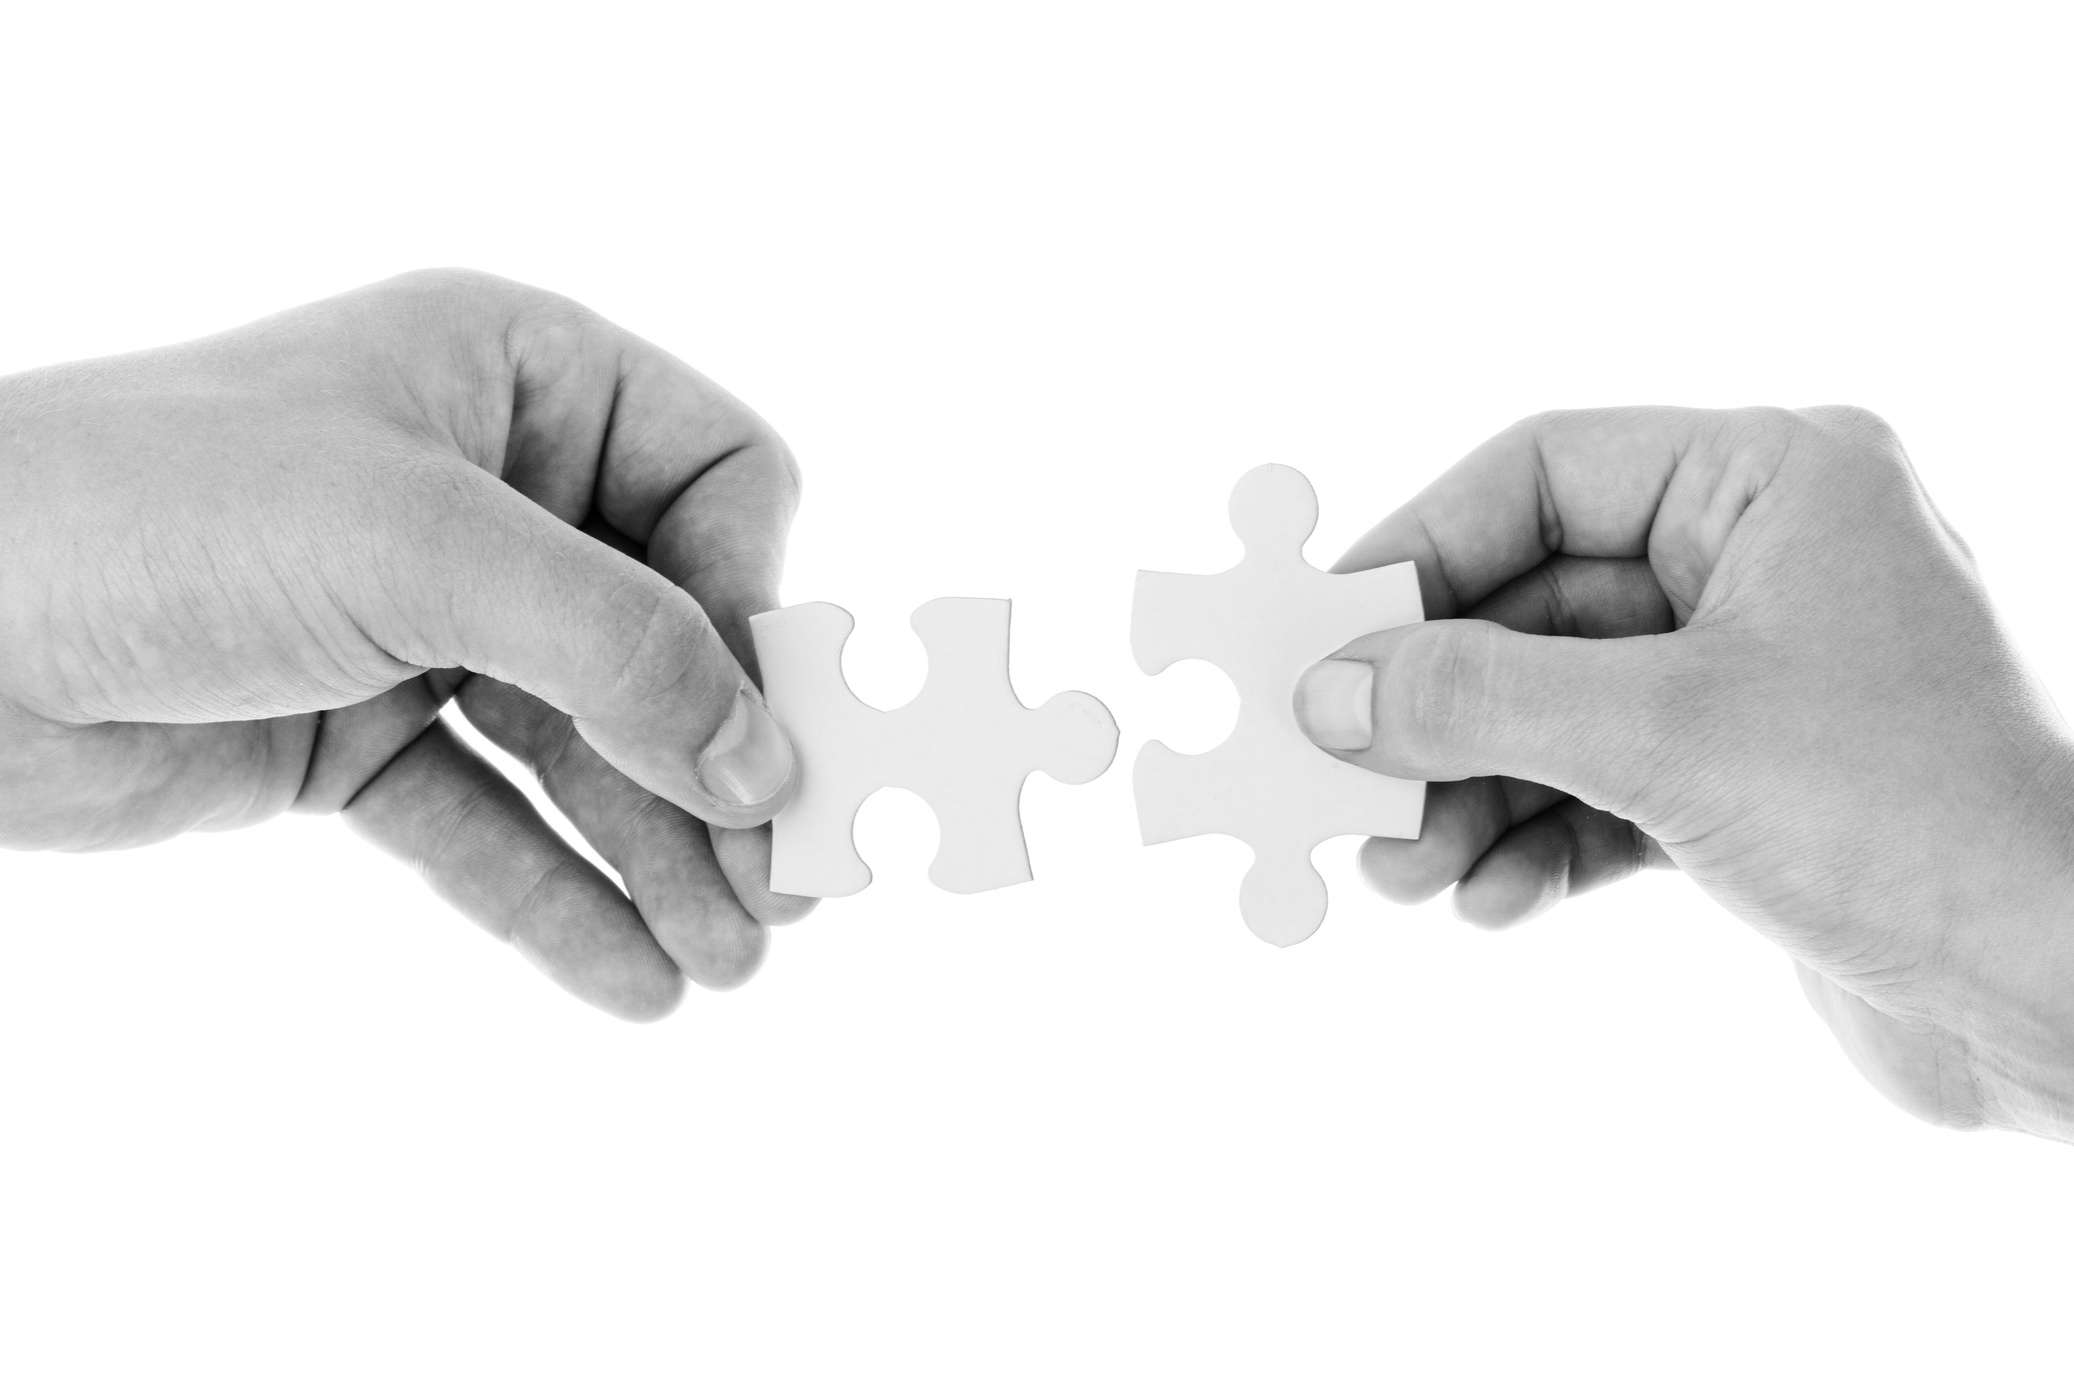 Hands Holding Puzzle Pieces on White Background